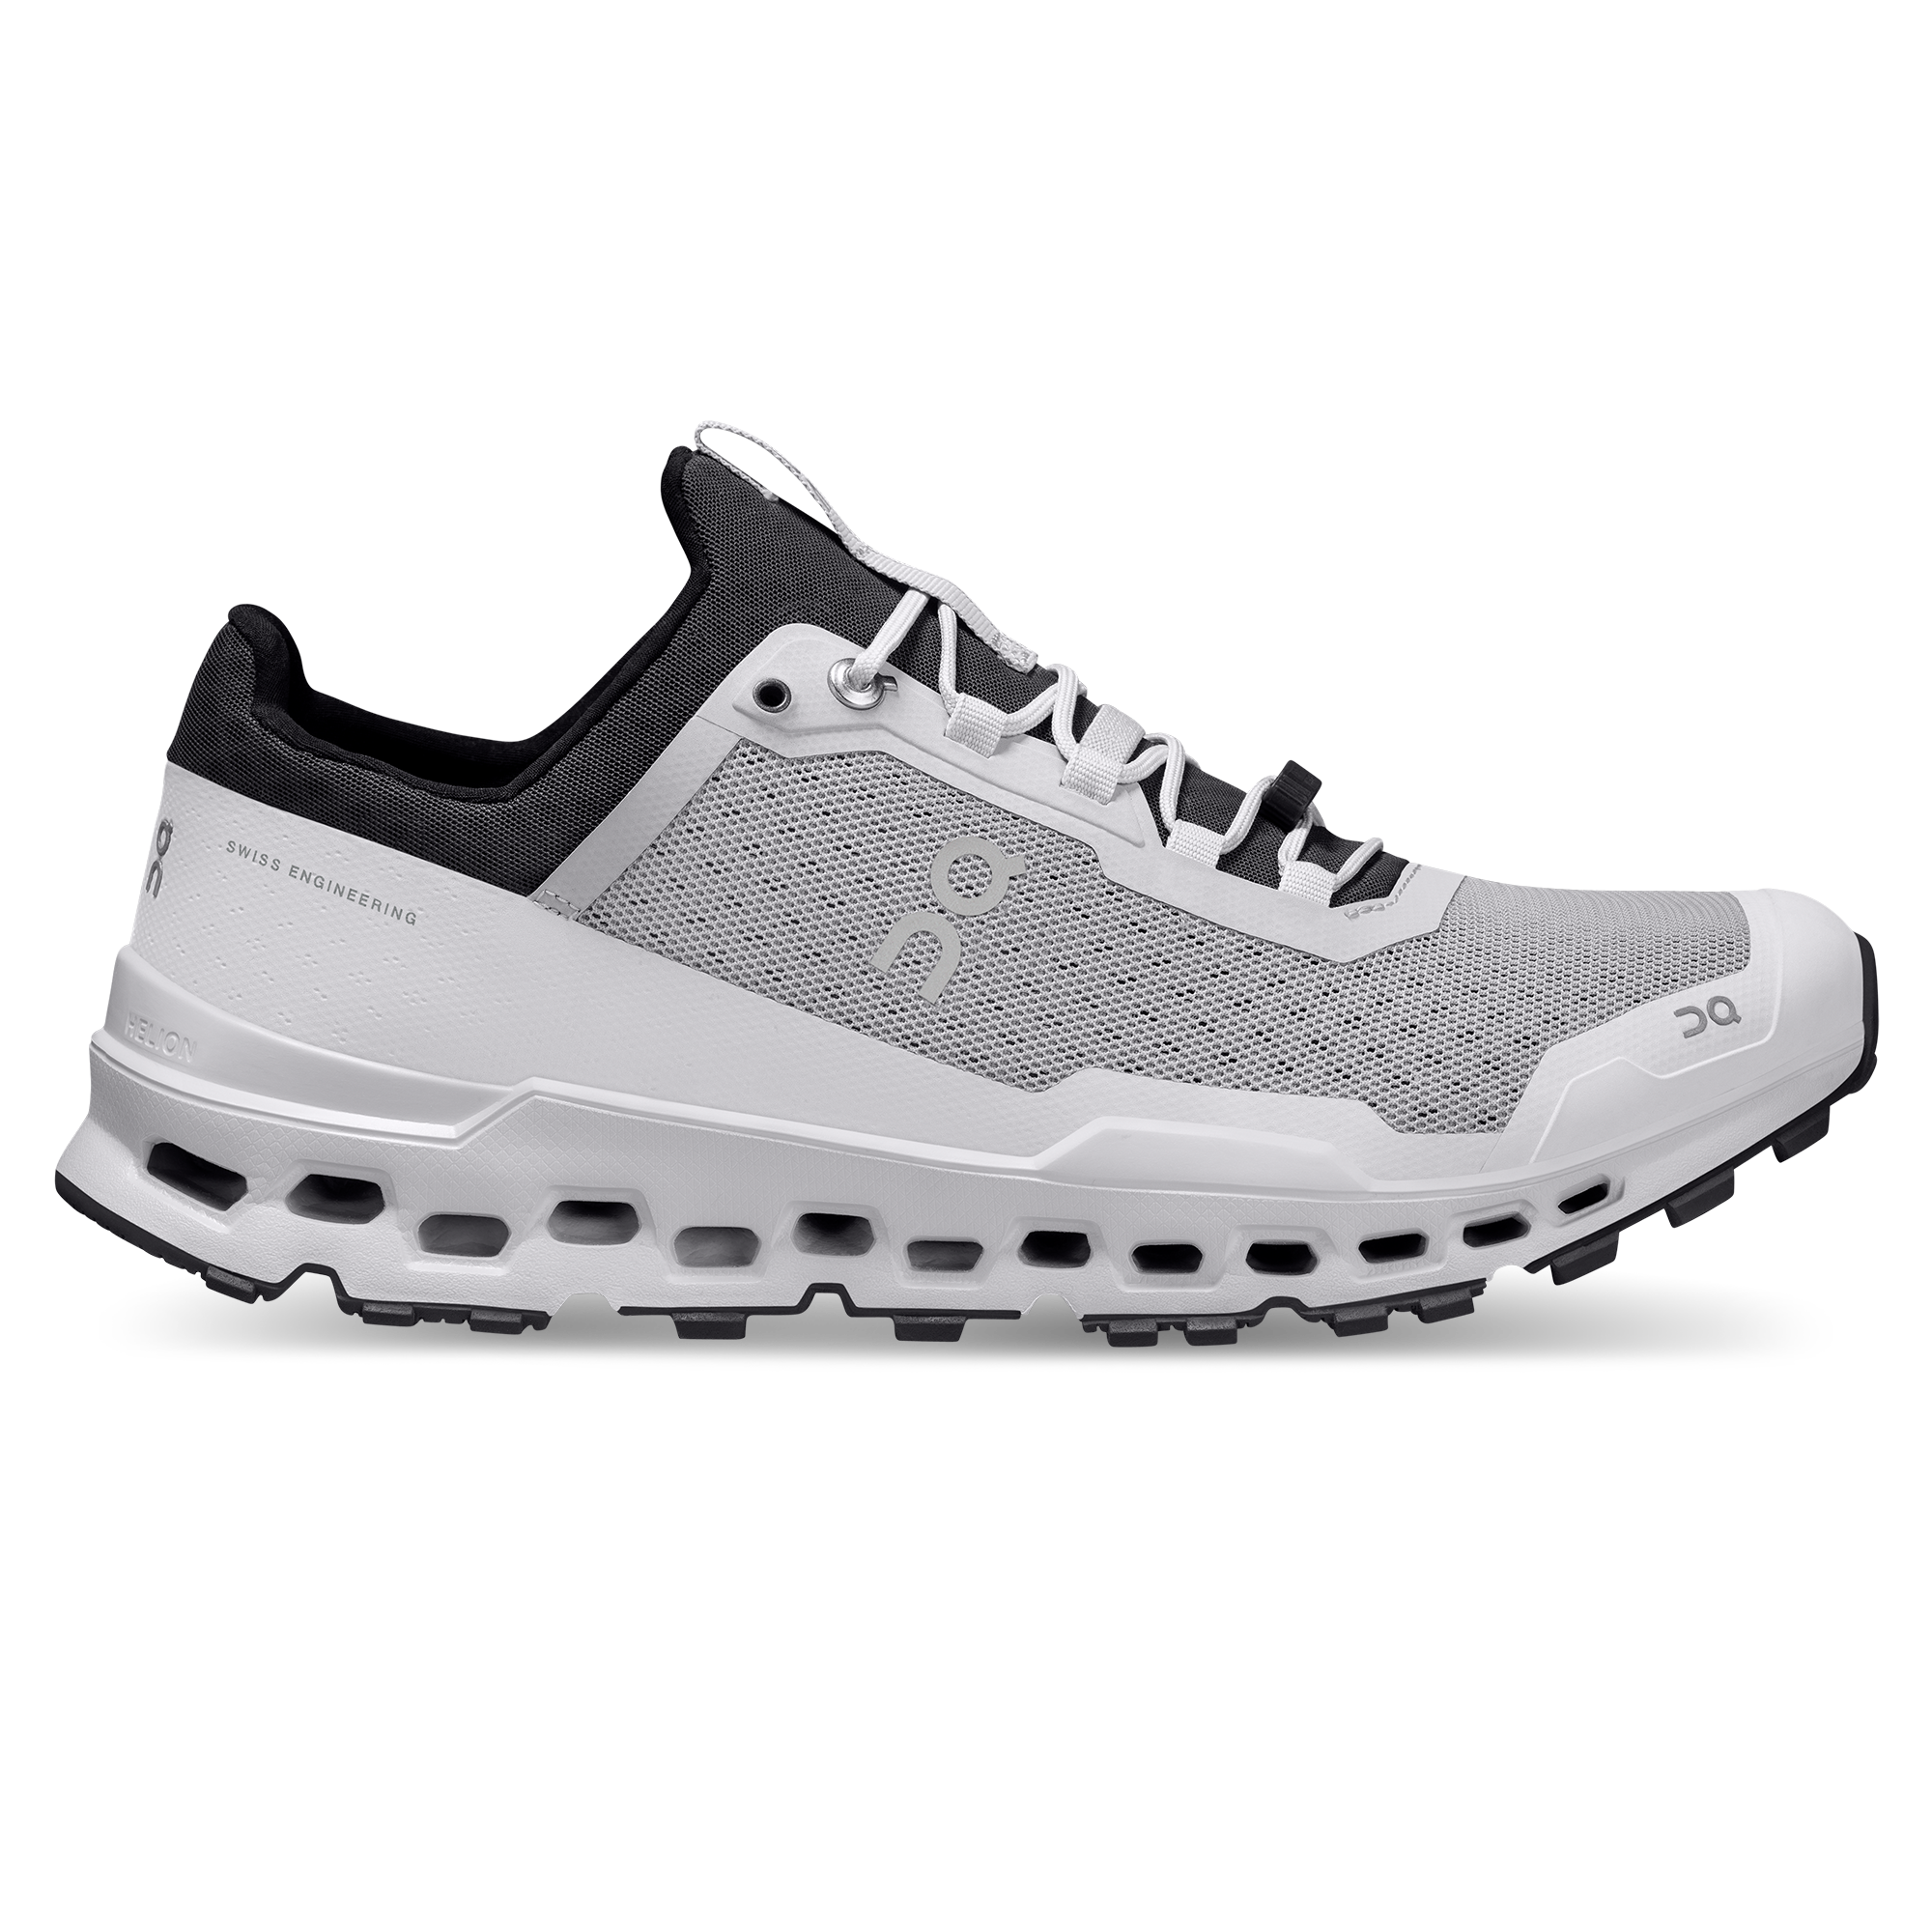 Best running shoes 2021 - On Cloud Ultra